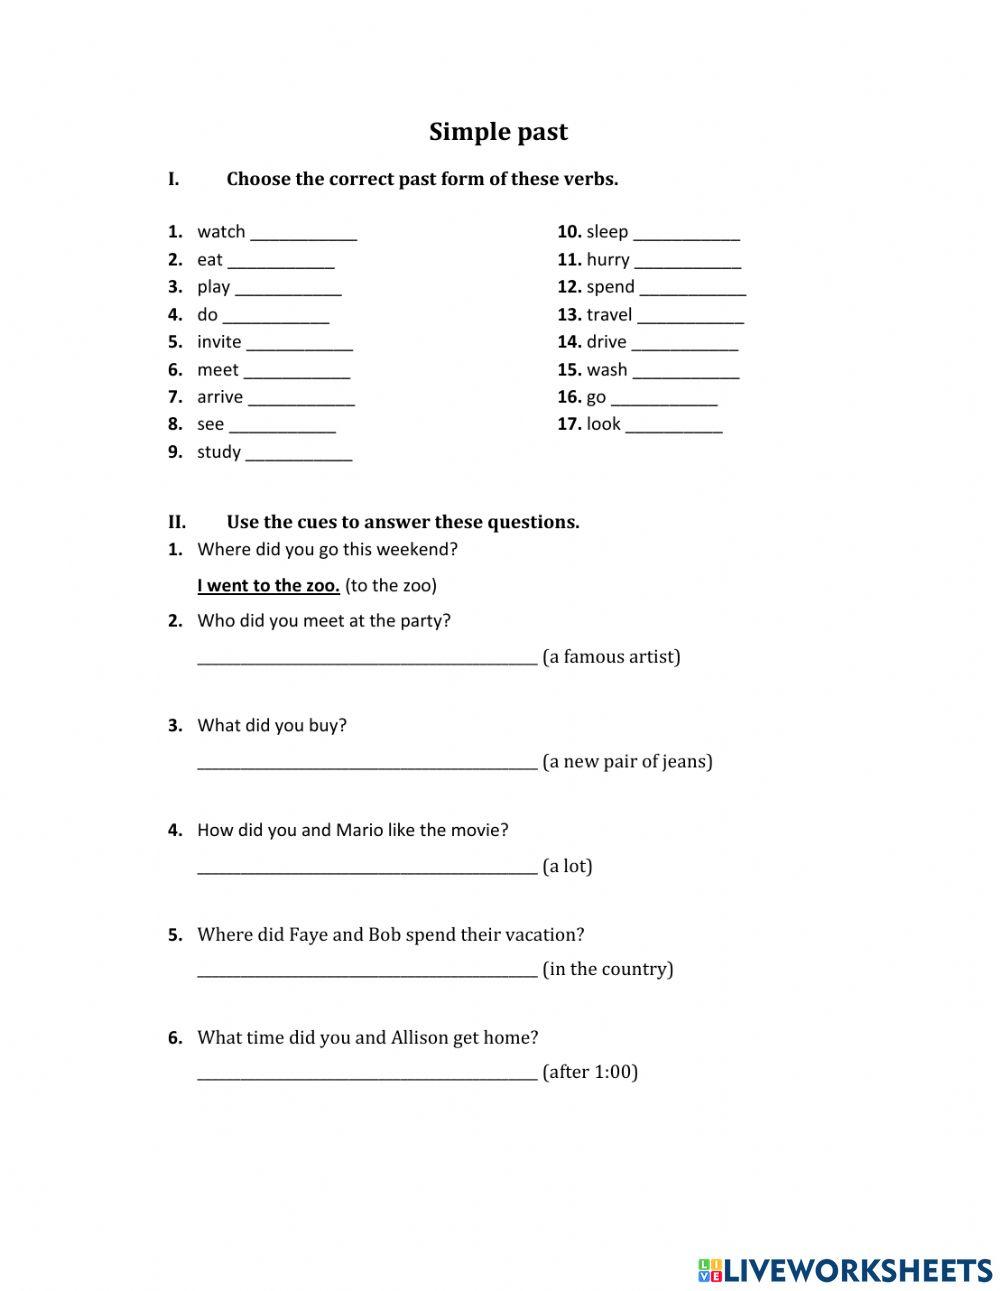 Simple past online exercise for grade 6 | Live Worksheets